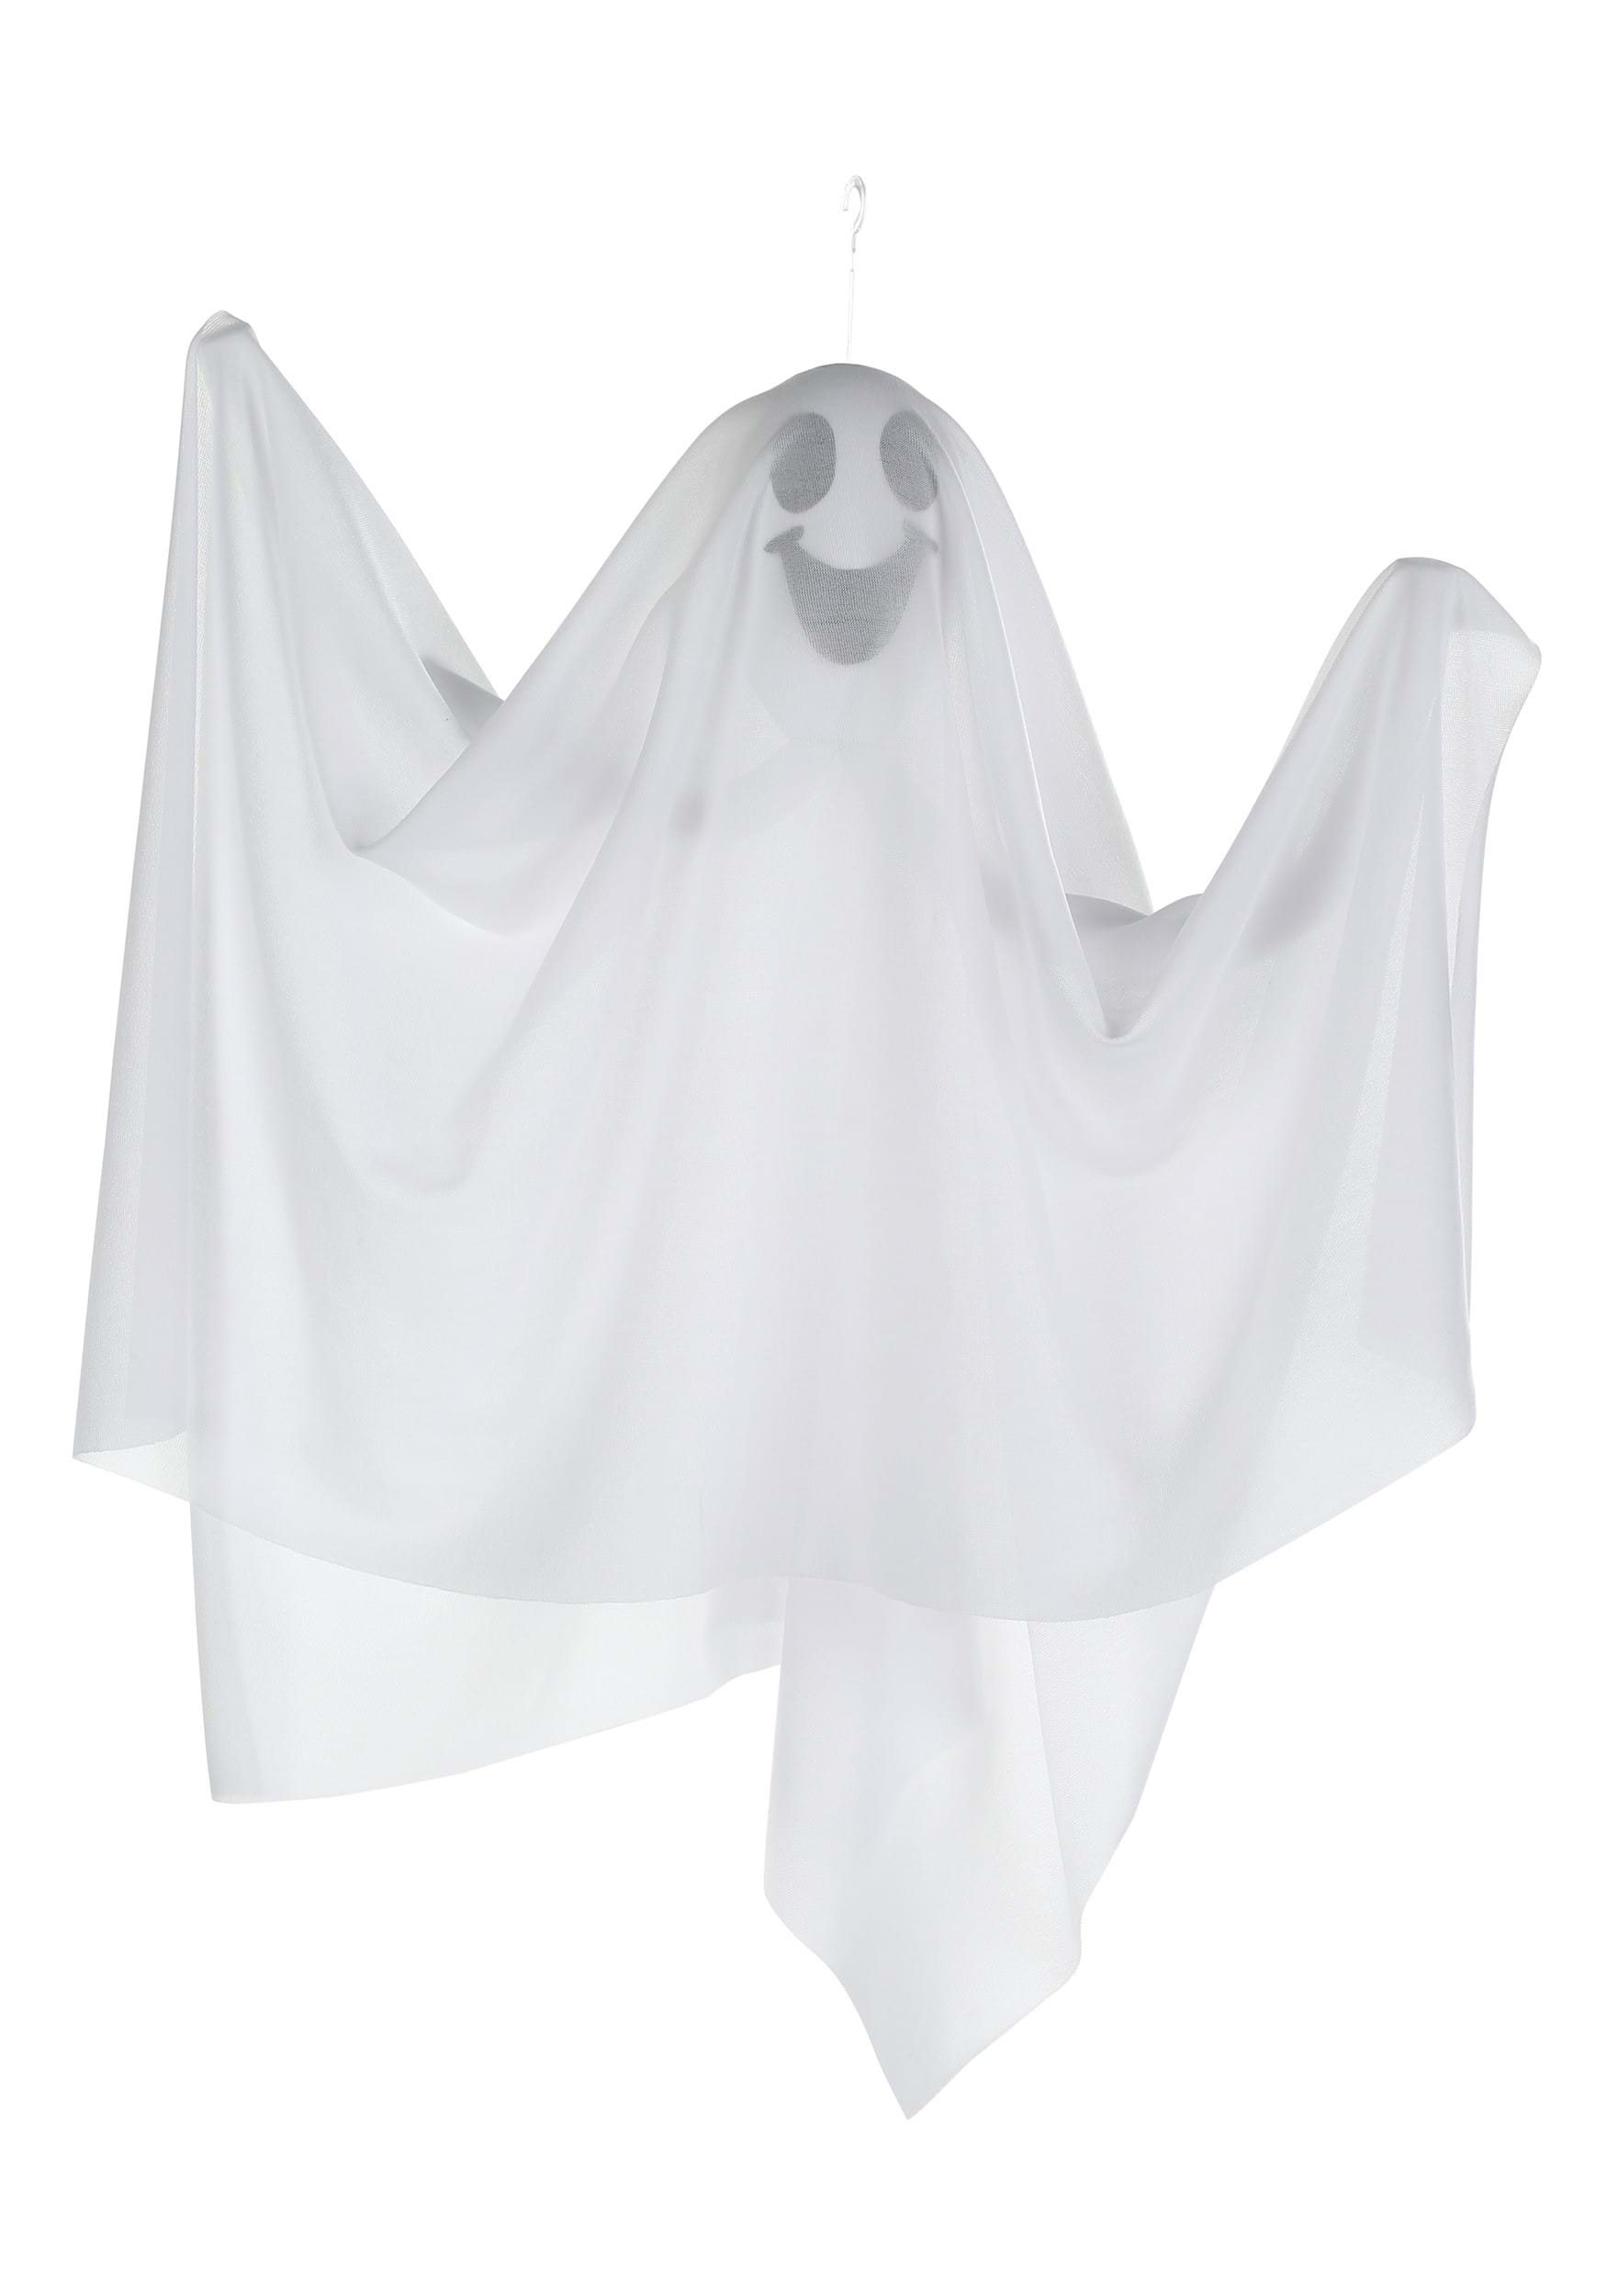 17″ Hanging Friendly Ghost Prop